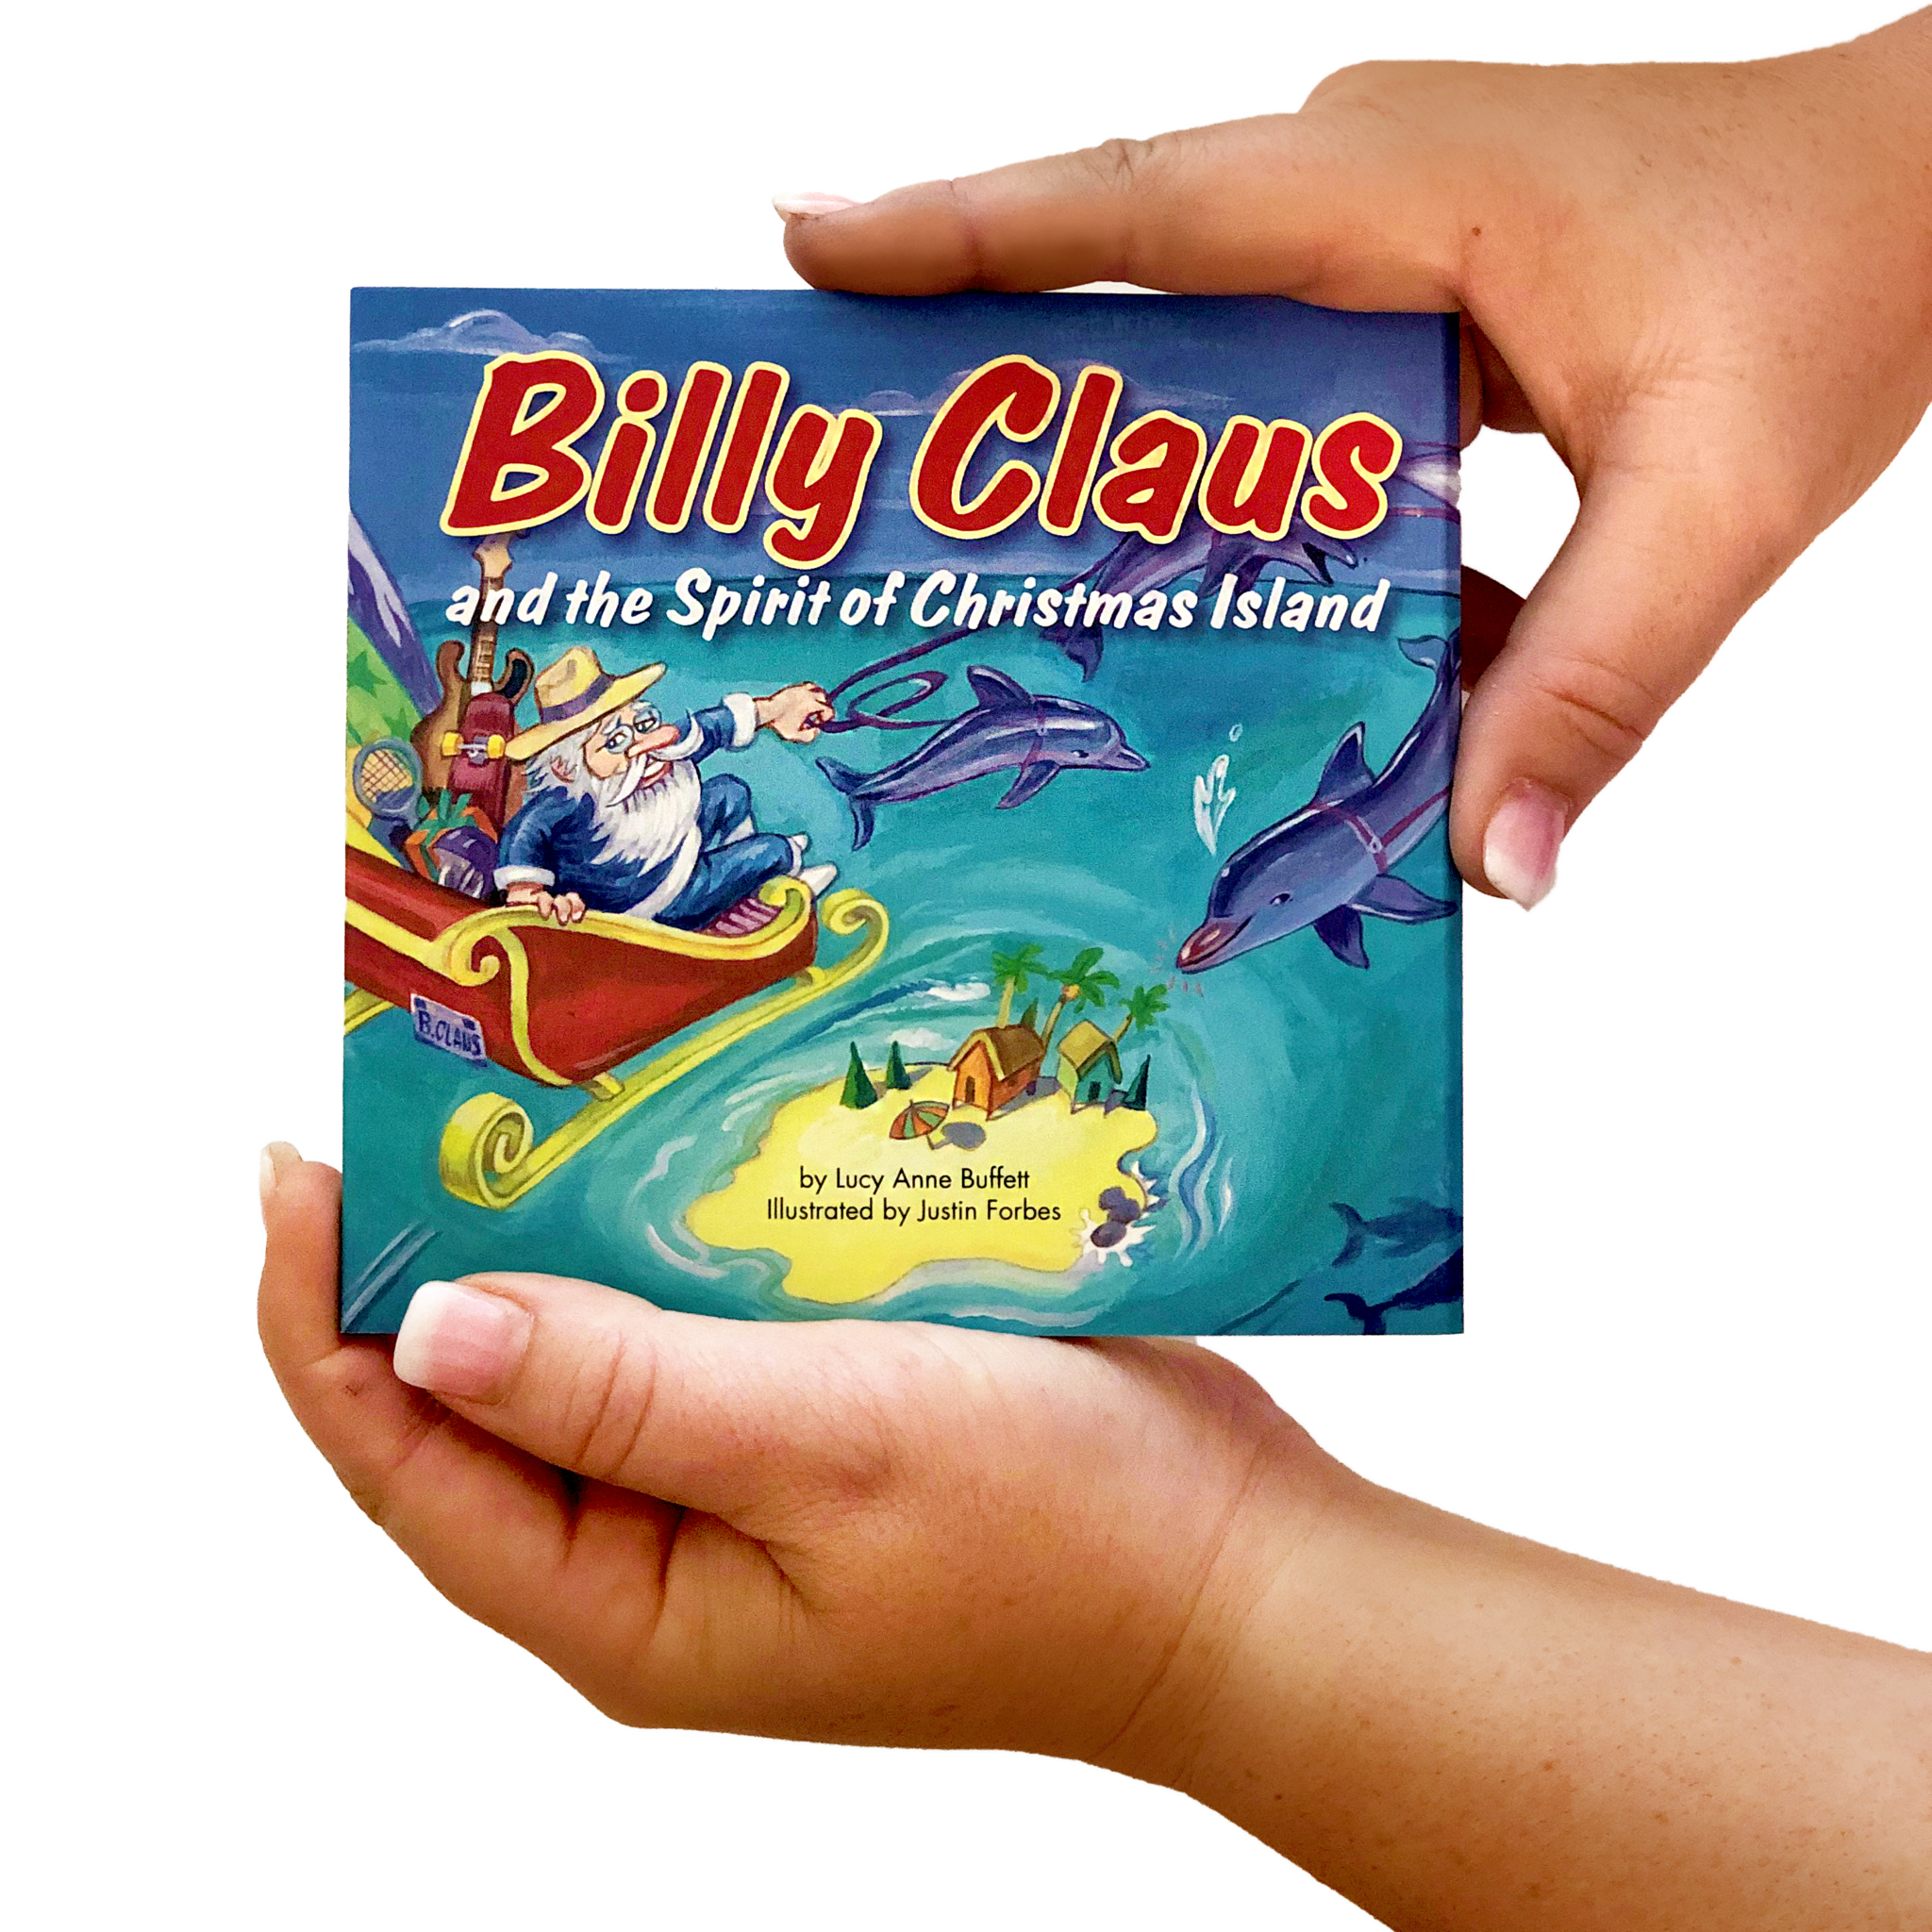 Billy Claus Billy Claus Novelty Book